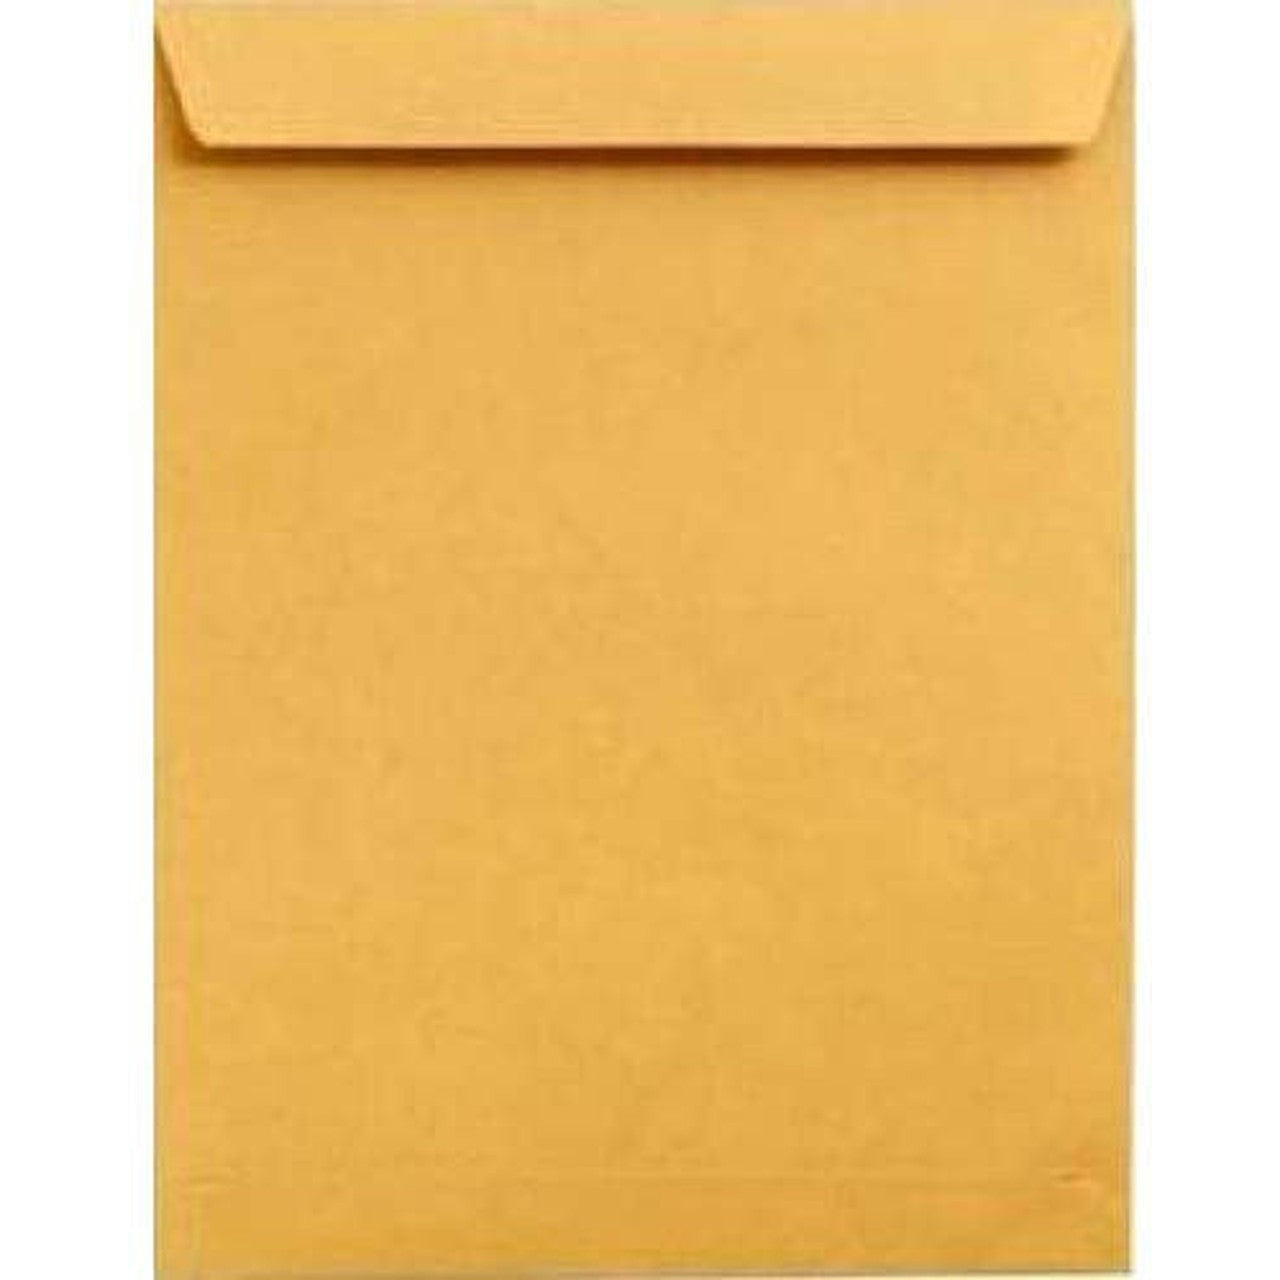 Envelope A4 Brown Or White Pack Of50-Envelopes-Other-Brown-Star Light Kuwait